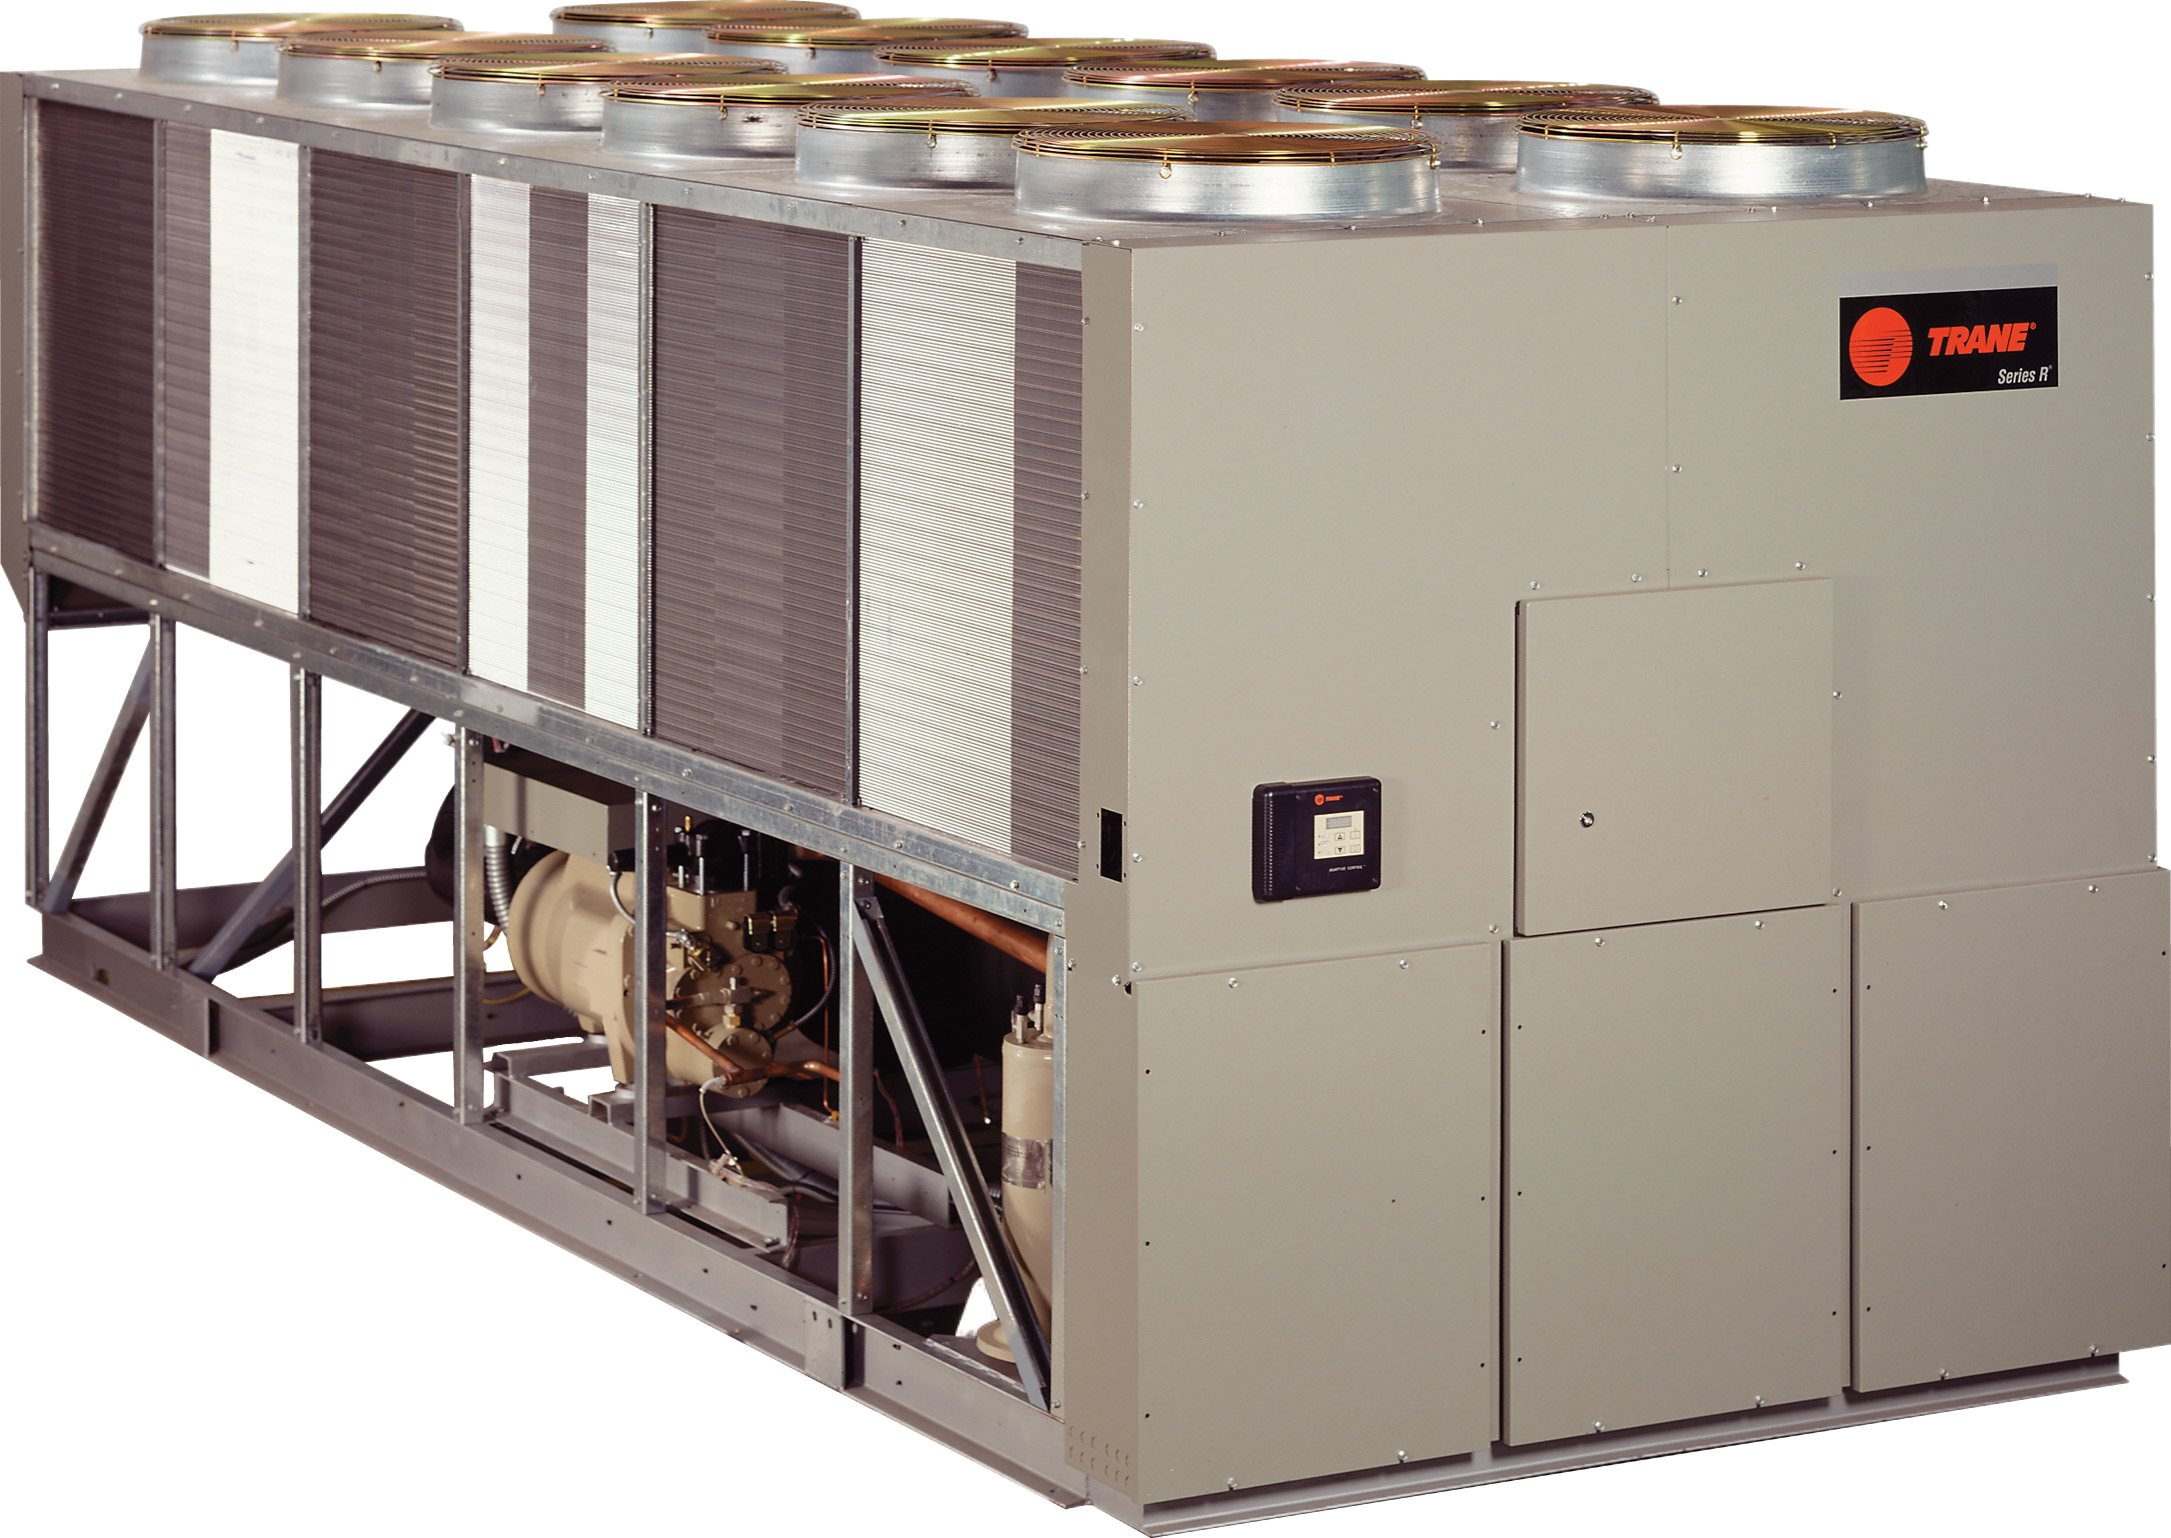 Series R Helical Rotary Chiller